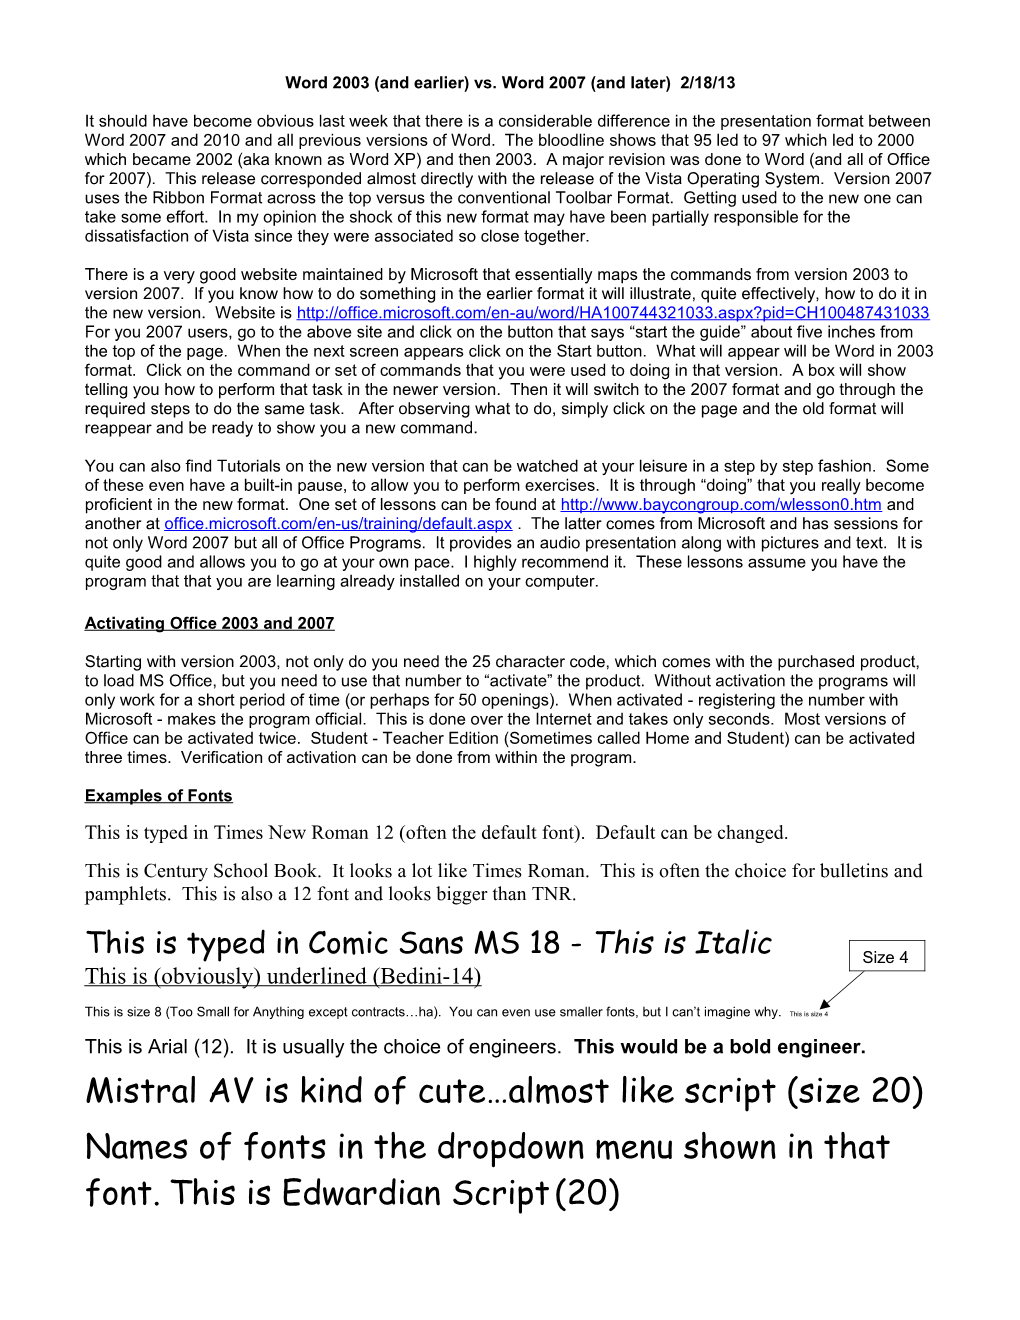 MS Word Handout for 1/19/04